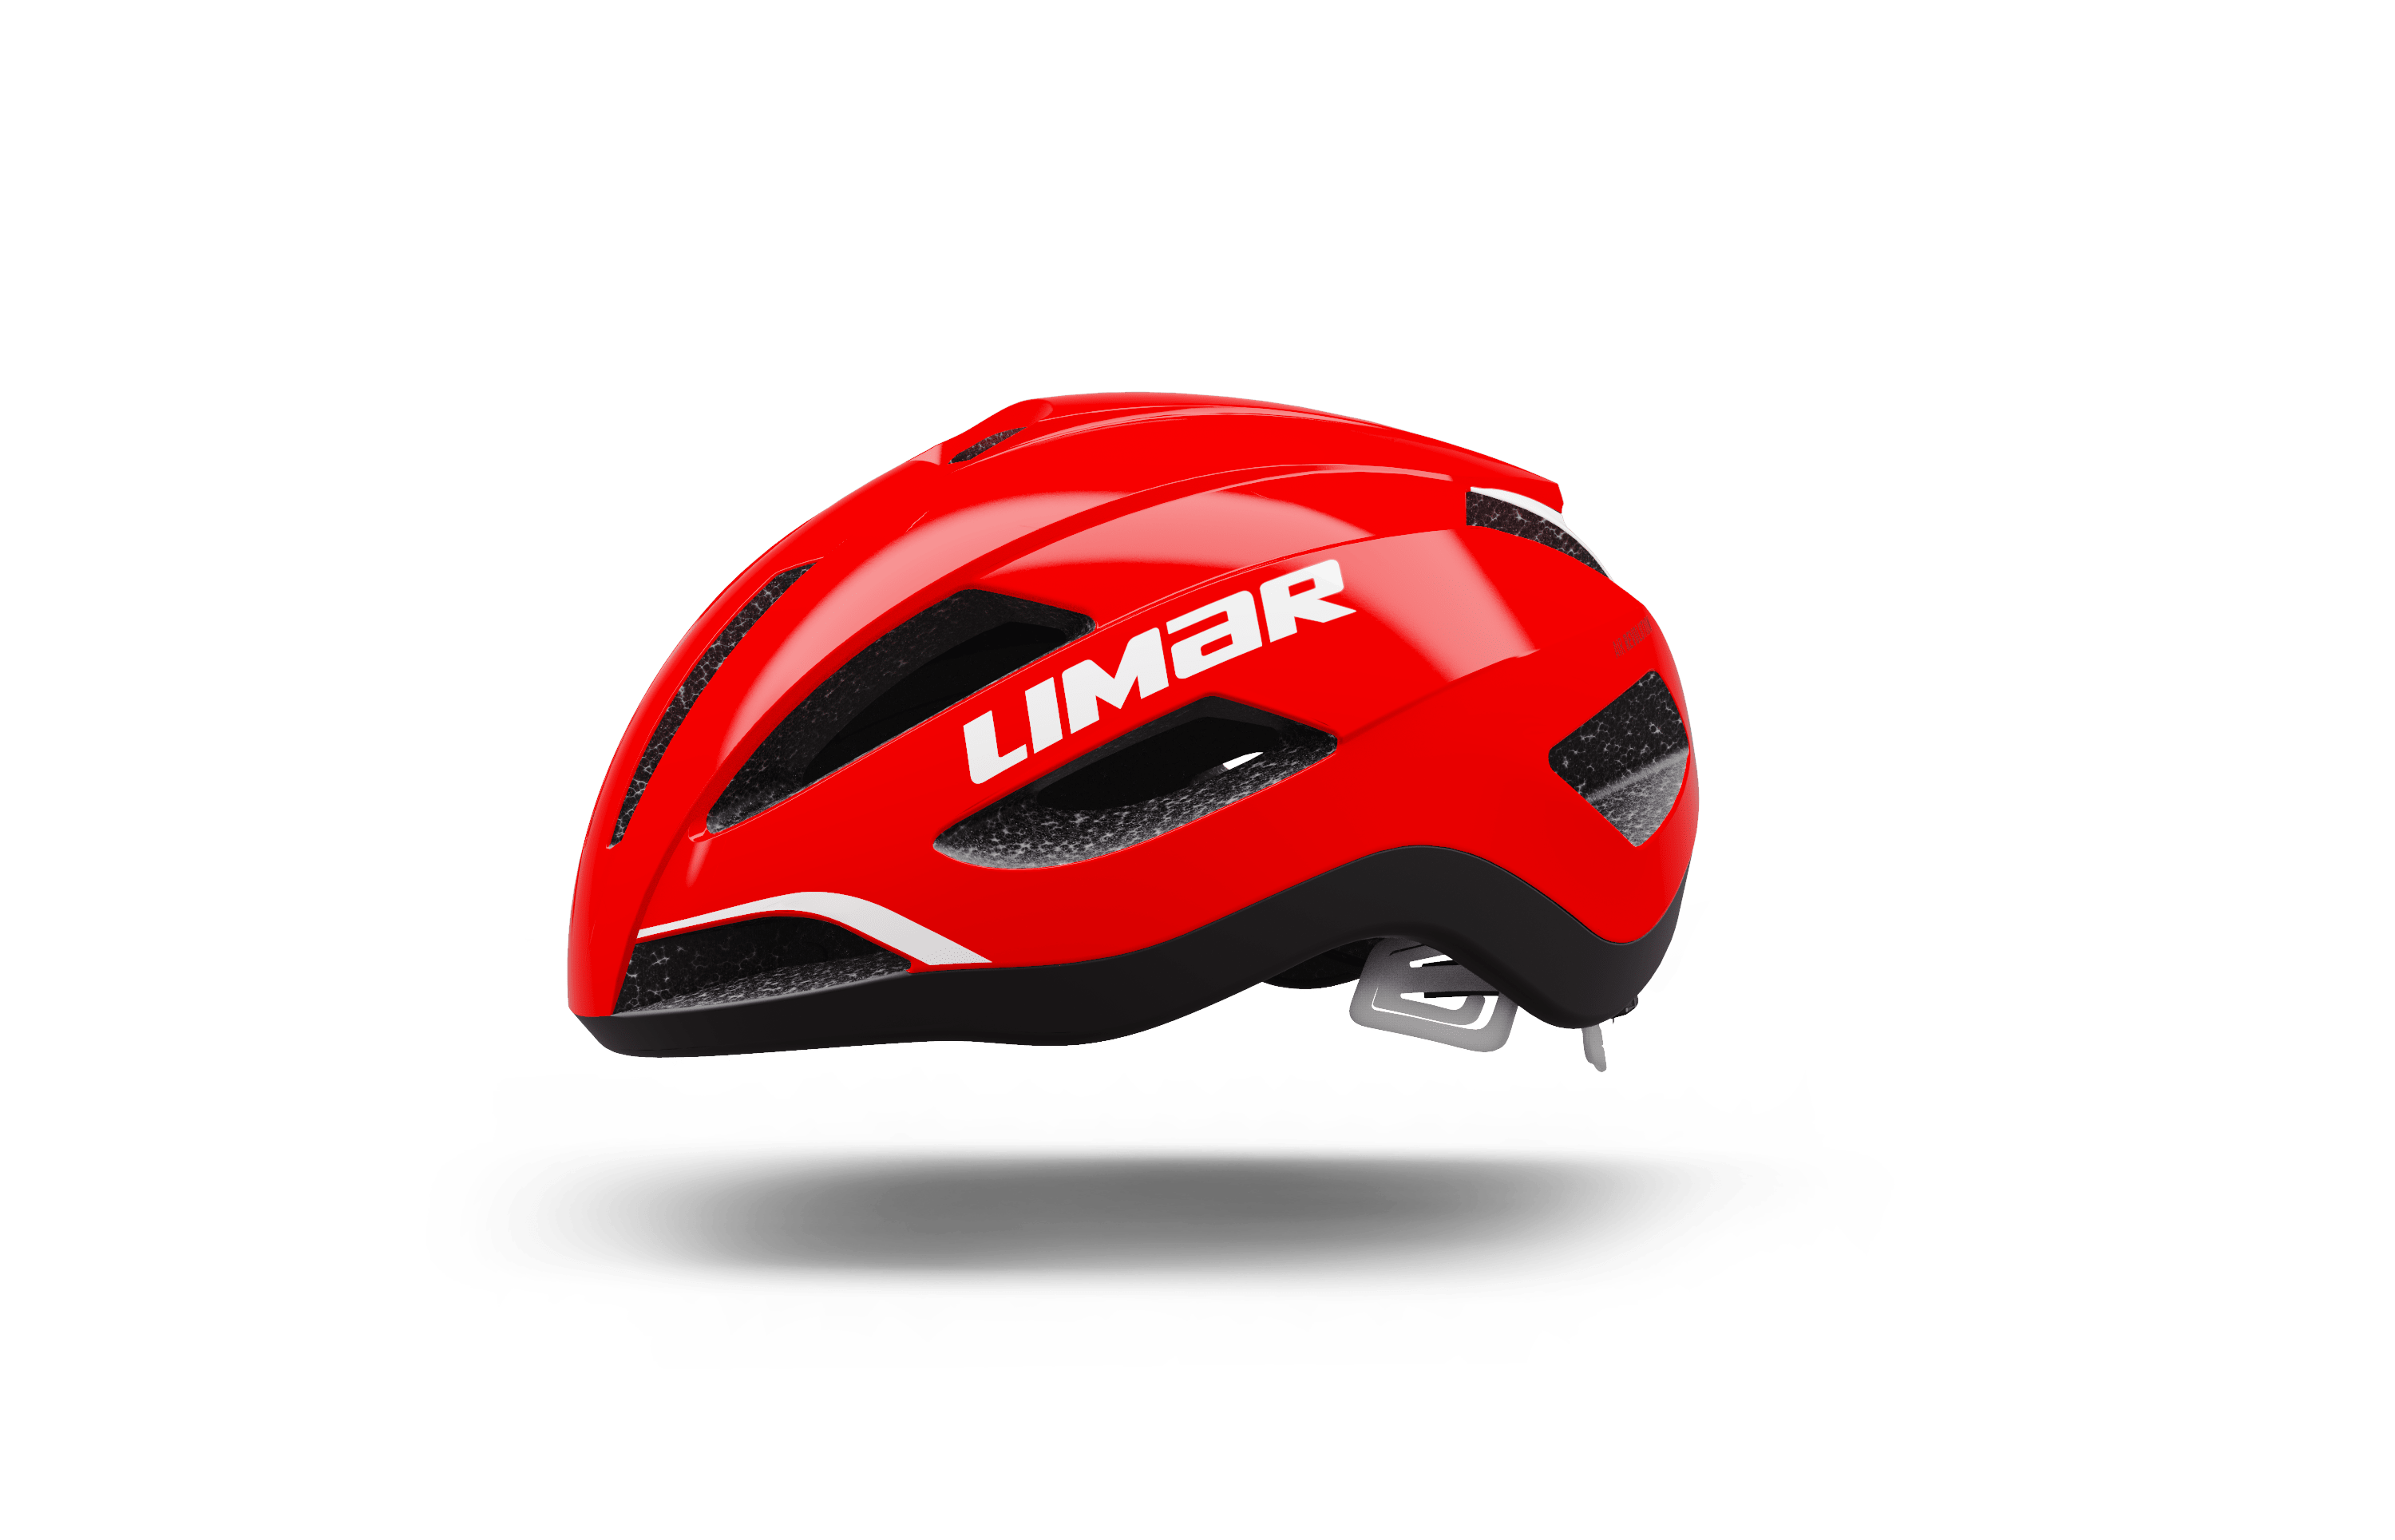 Casque-air-master-red